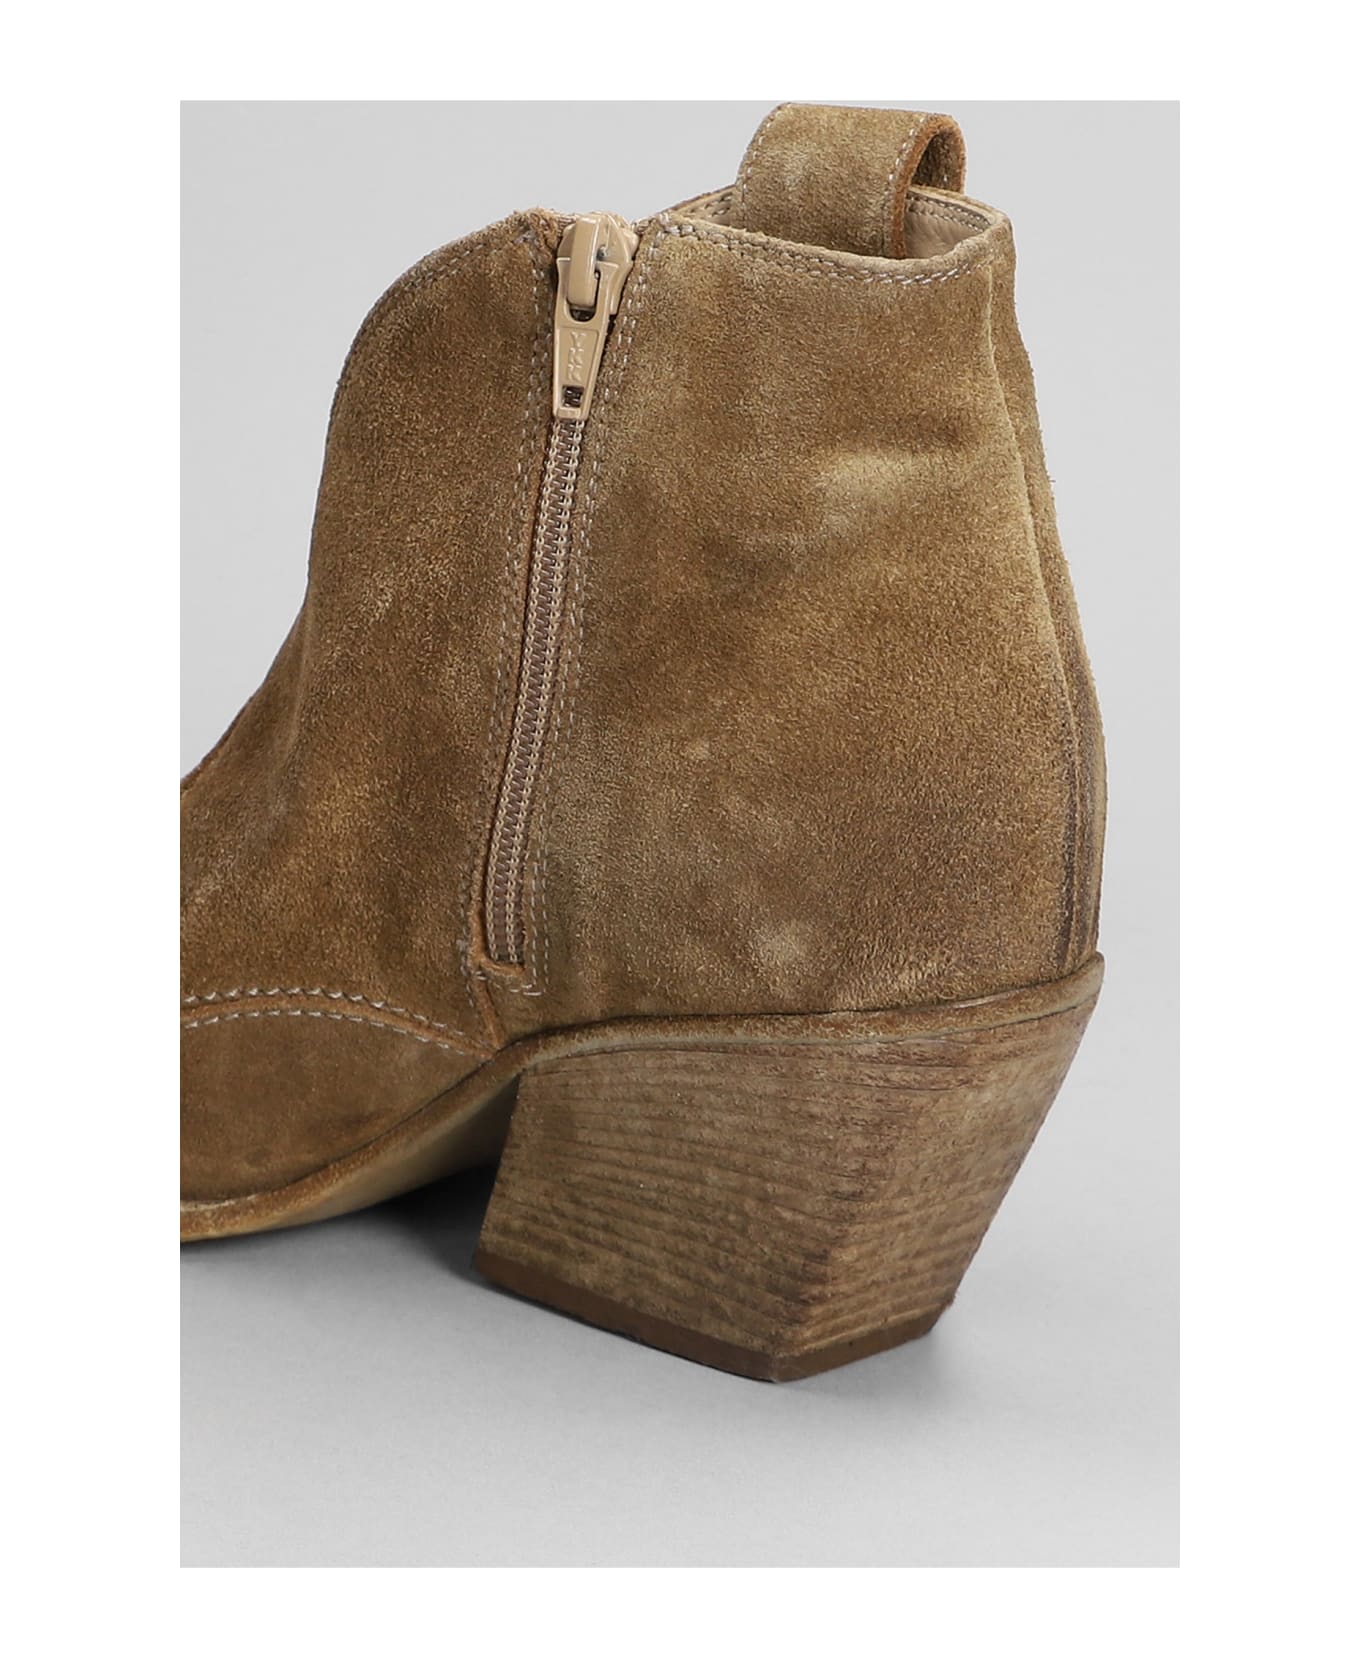 Elena Iachi Texan Ankle Boots In Camel Suede - Camel